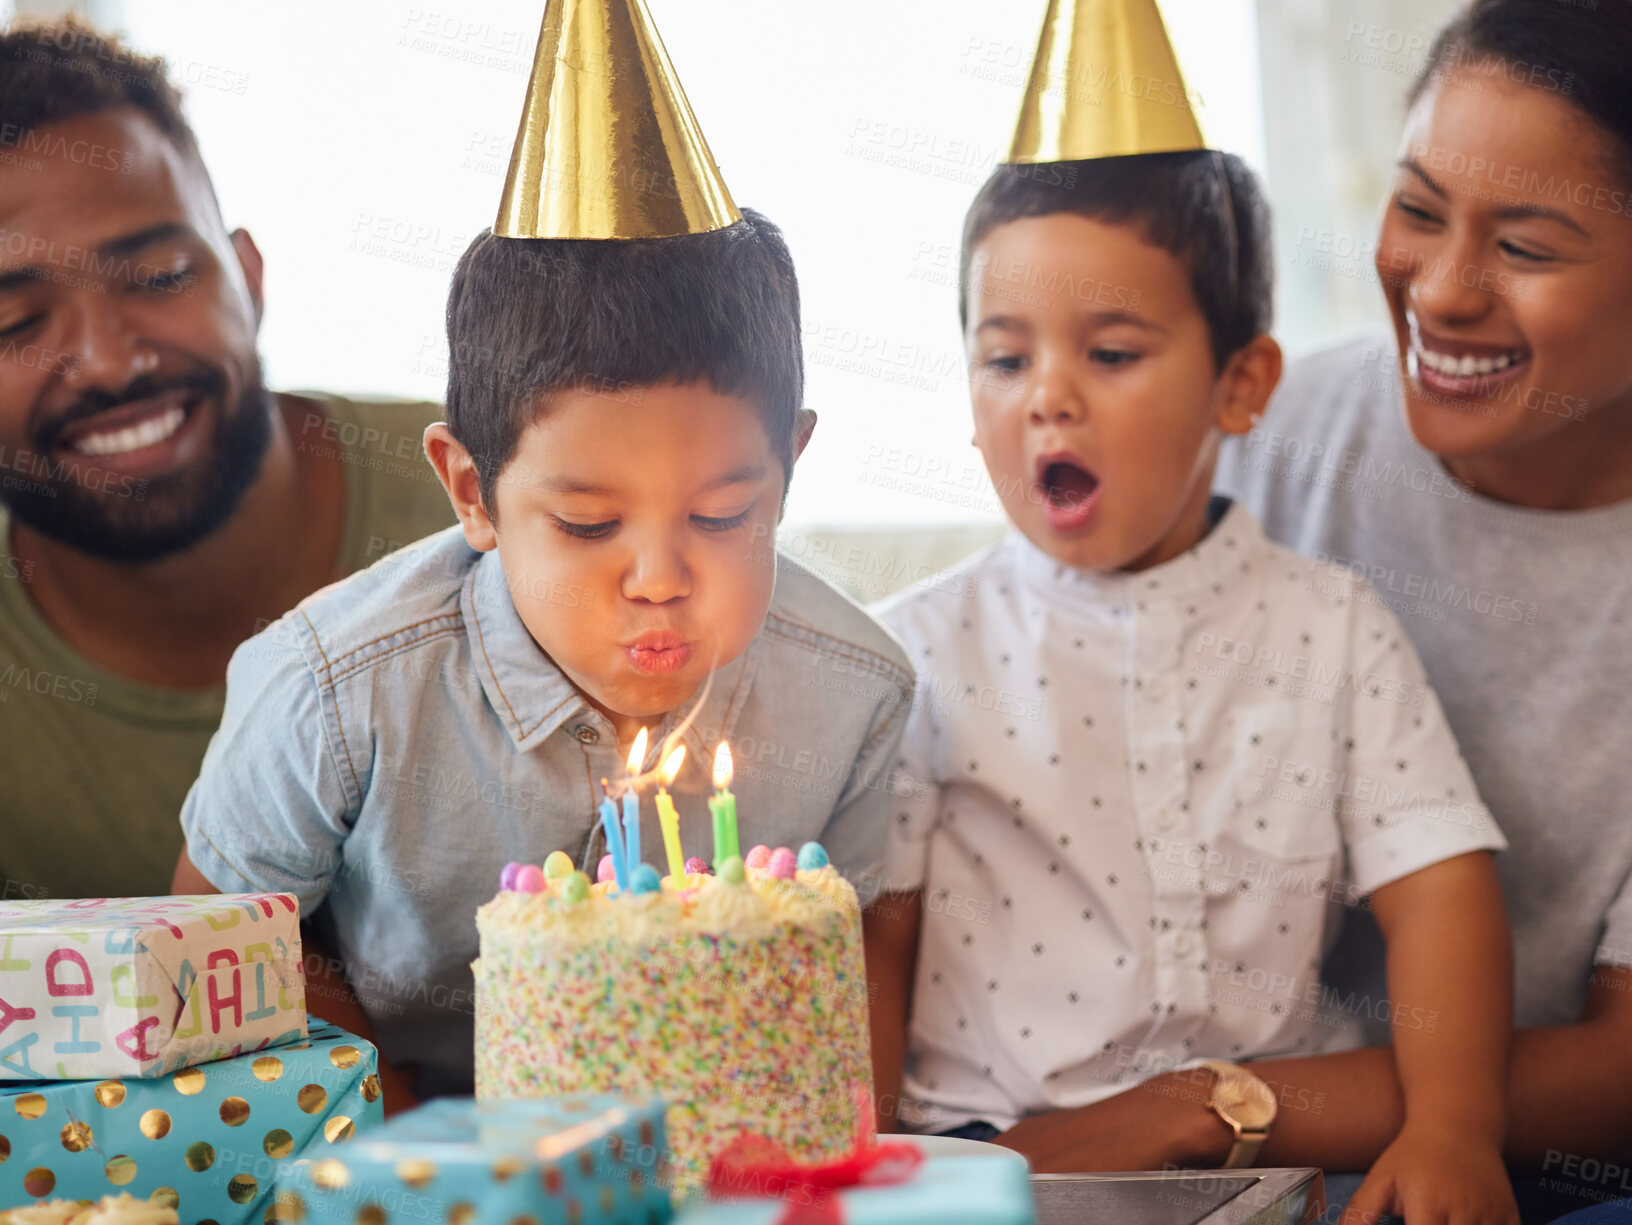 Buy stock photo Closeup of a little mixed race boy blowing the candles on a cake at a birthday party with his little brother and parents smiling and watching. Cute hispanic boy celebrating his birthday with his family at home